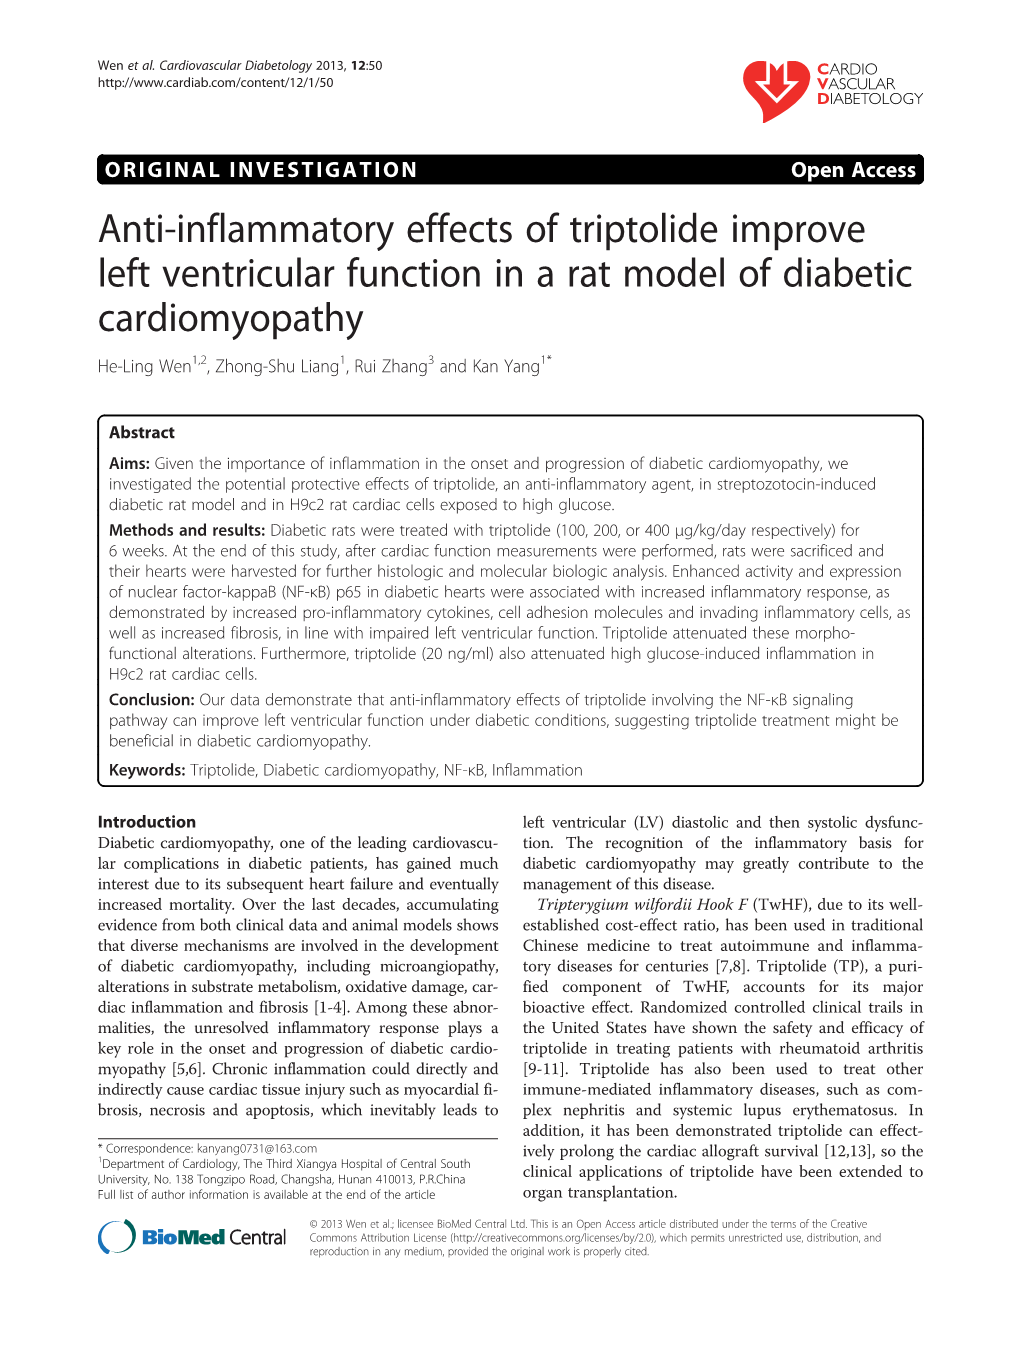 Anti-Inflammatory Effects of Triptolide Improve Left Ventricular Function in A